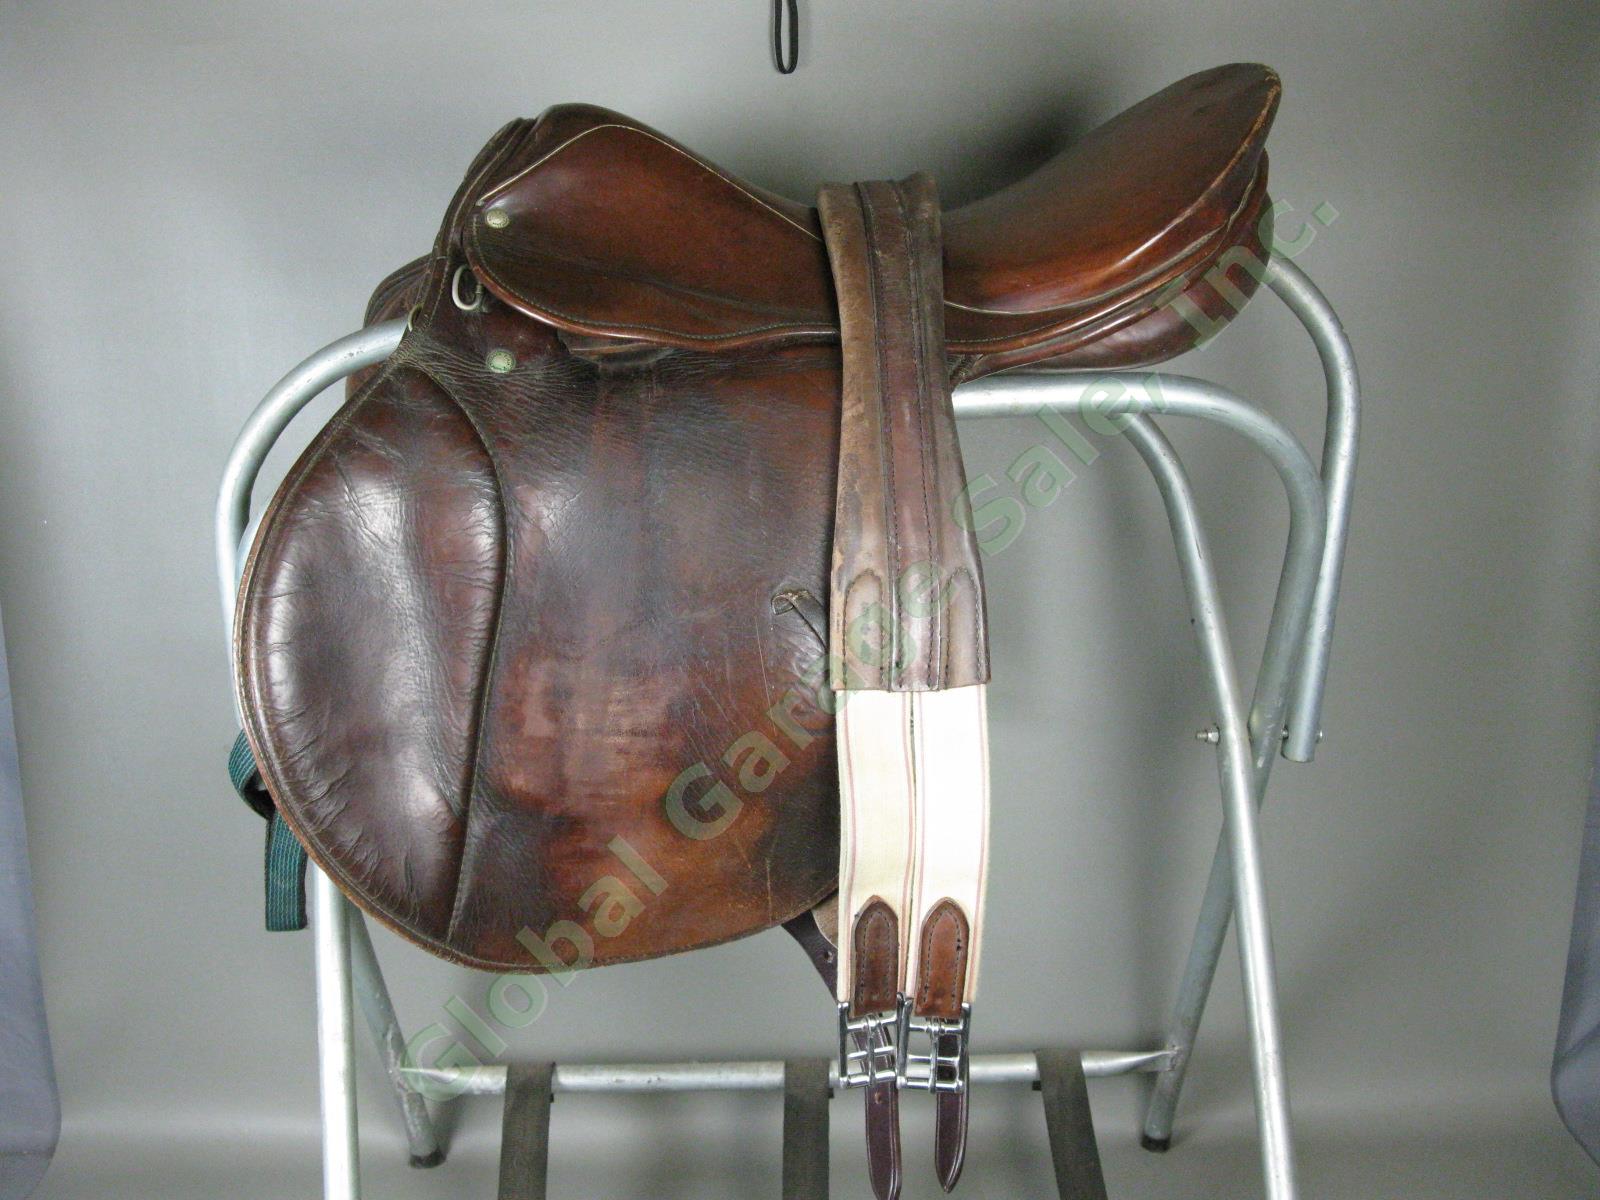 Stubben Parzival 18.5" English Dressage Saddle 34497 31" Tree Made In Germany NR